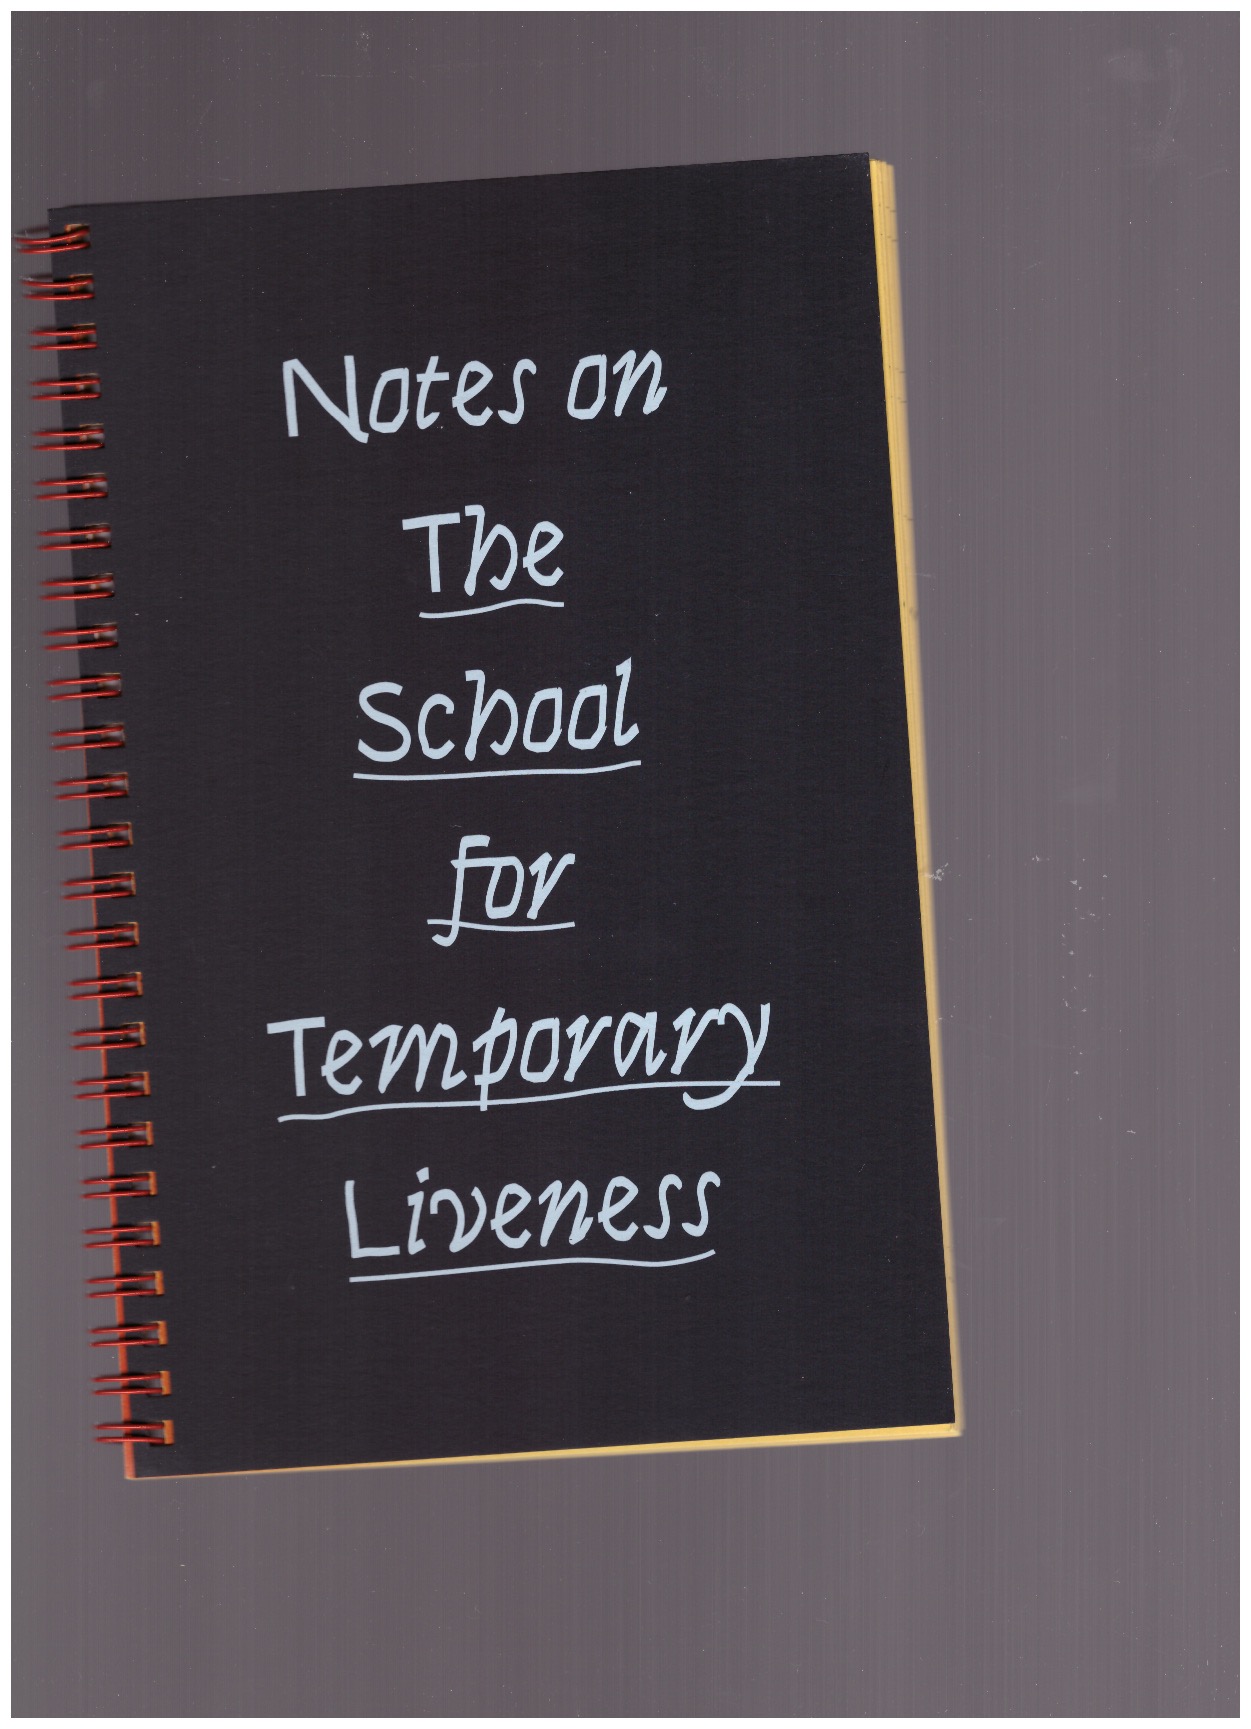 BAKST, Lauren (ed.) - Notes on the School for Temporary Liveness